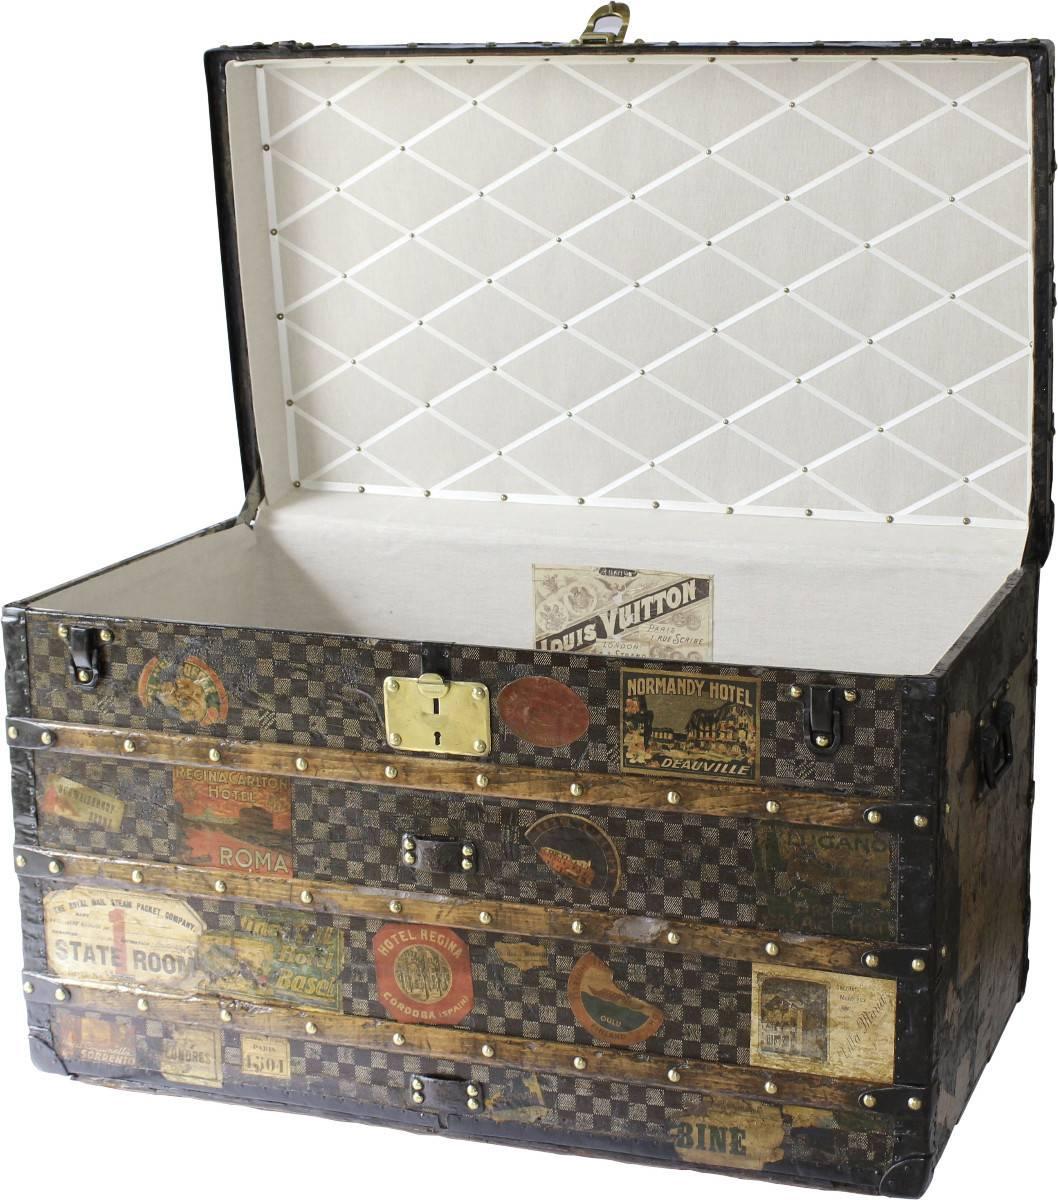 Extremely rare large courier trunk with a collection of vintage hotel stickers from all corners of the globe. Good condition inside and out this will make a statement in any home. Refurbished interior quilting.